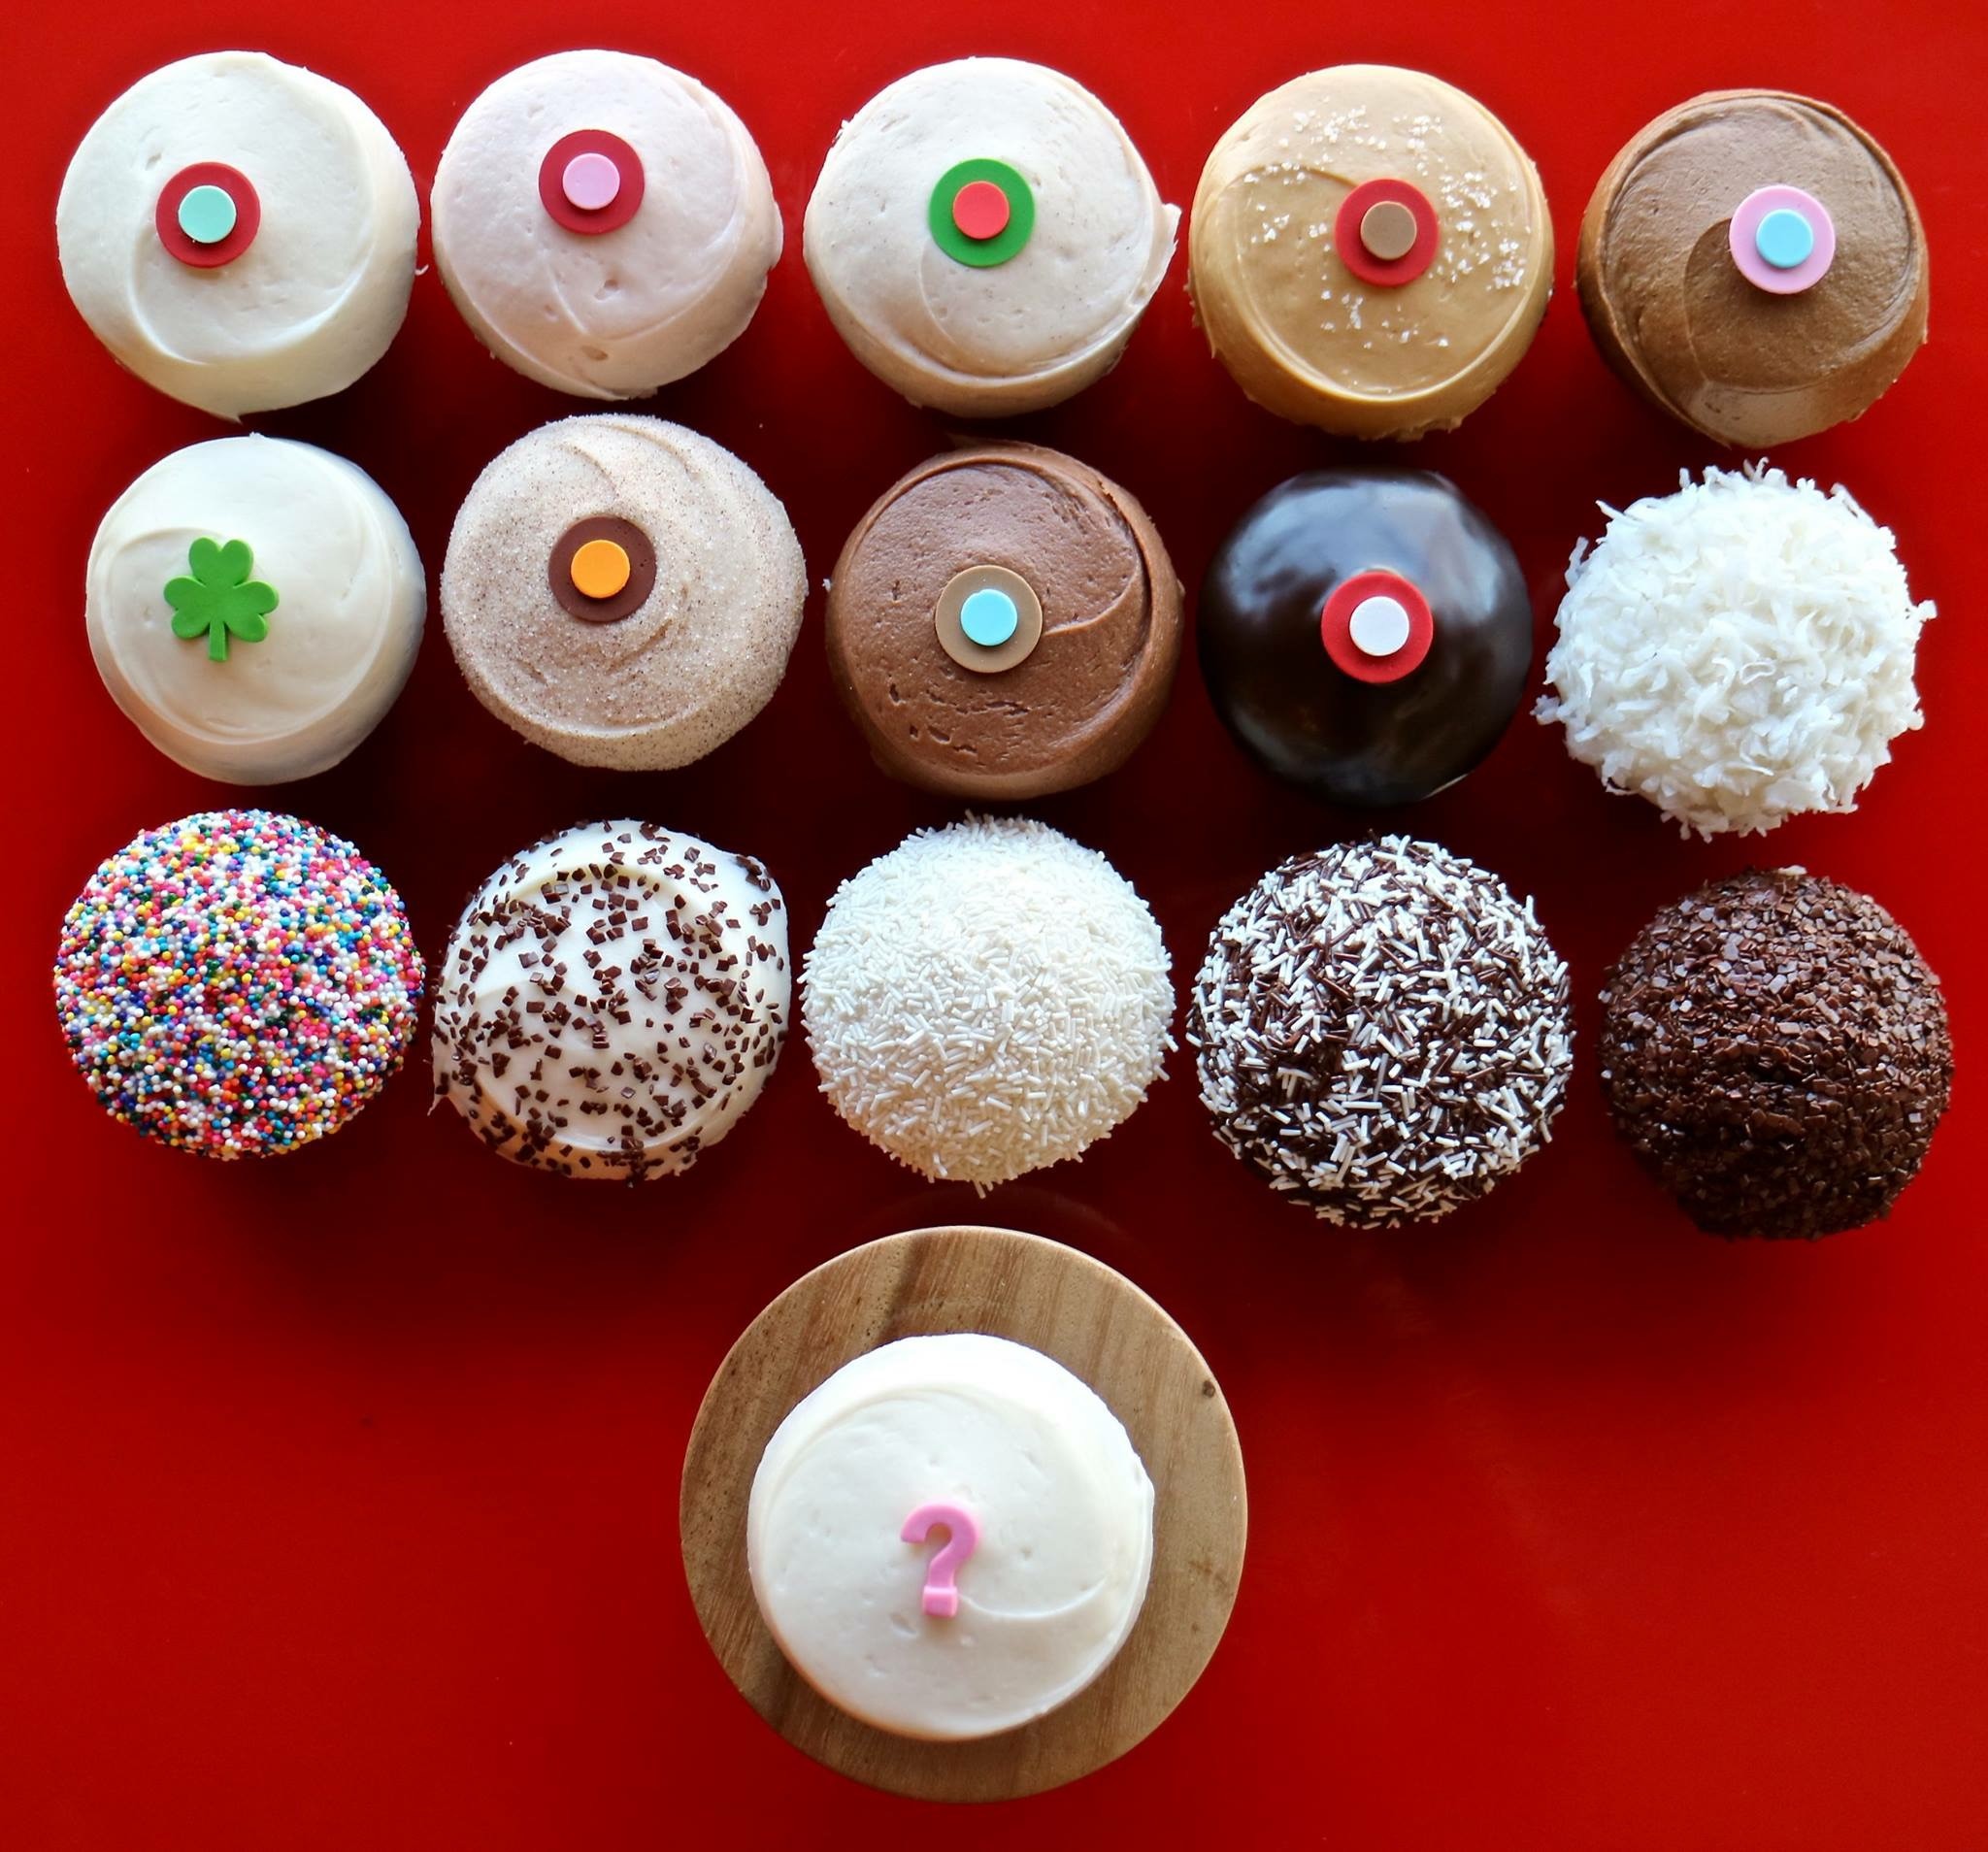 Enroll in Sprinkles Perks to Receive a Free Cupcake and Earn Rewards Points